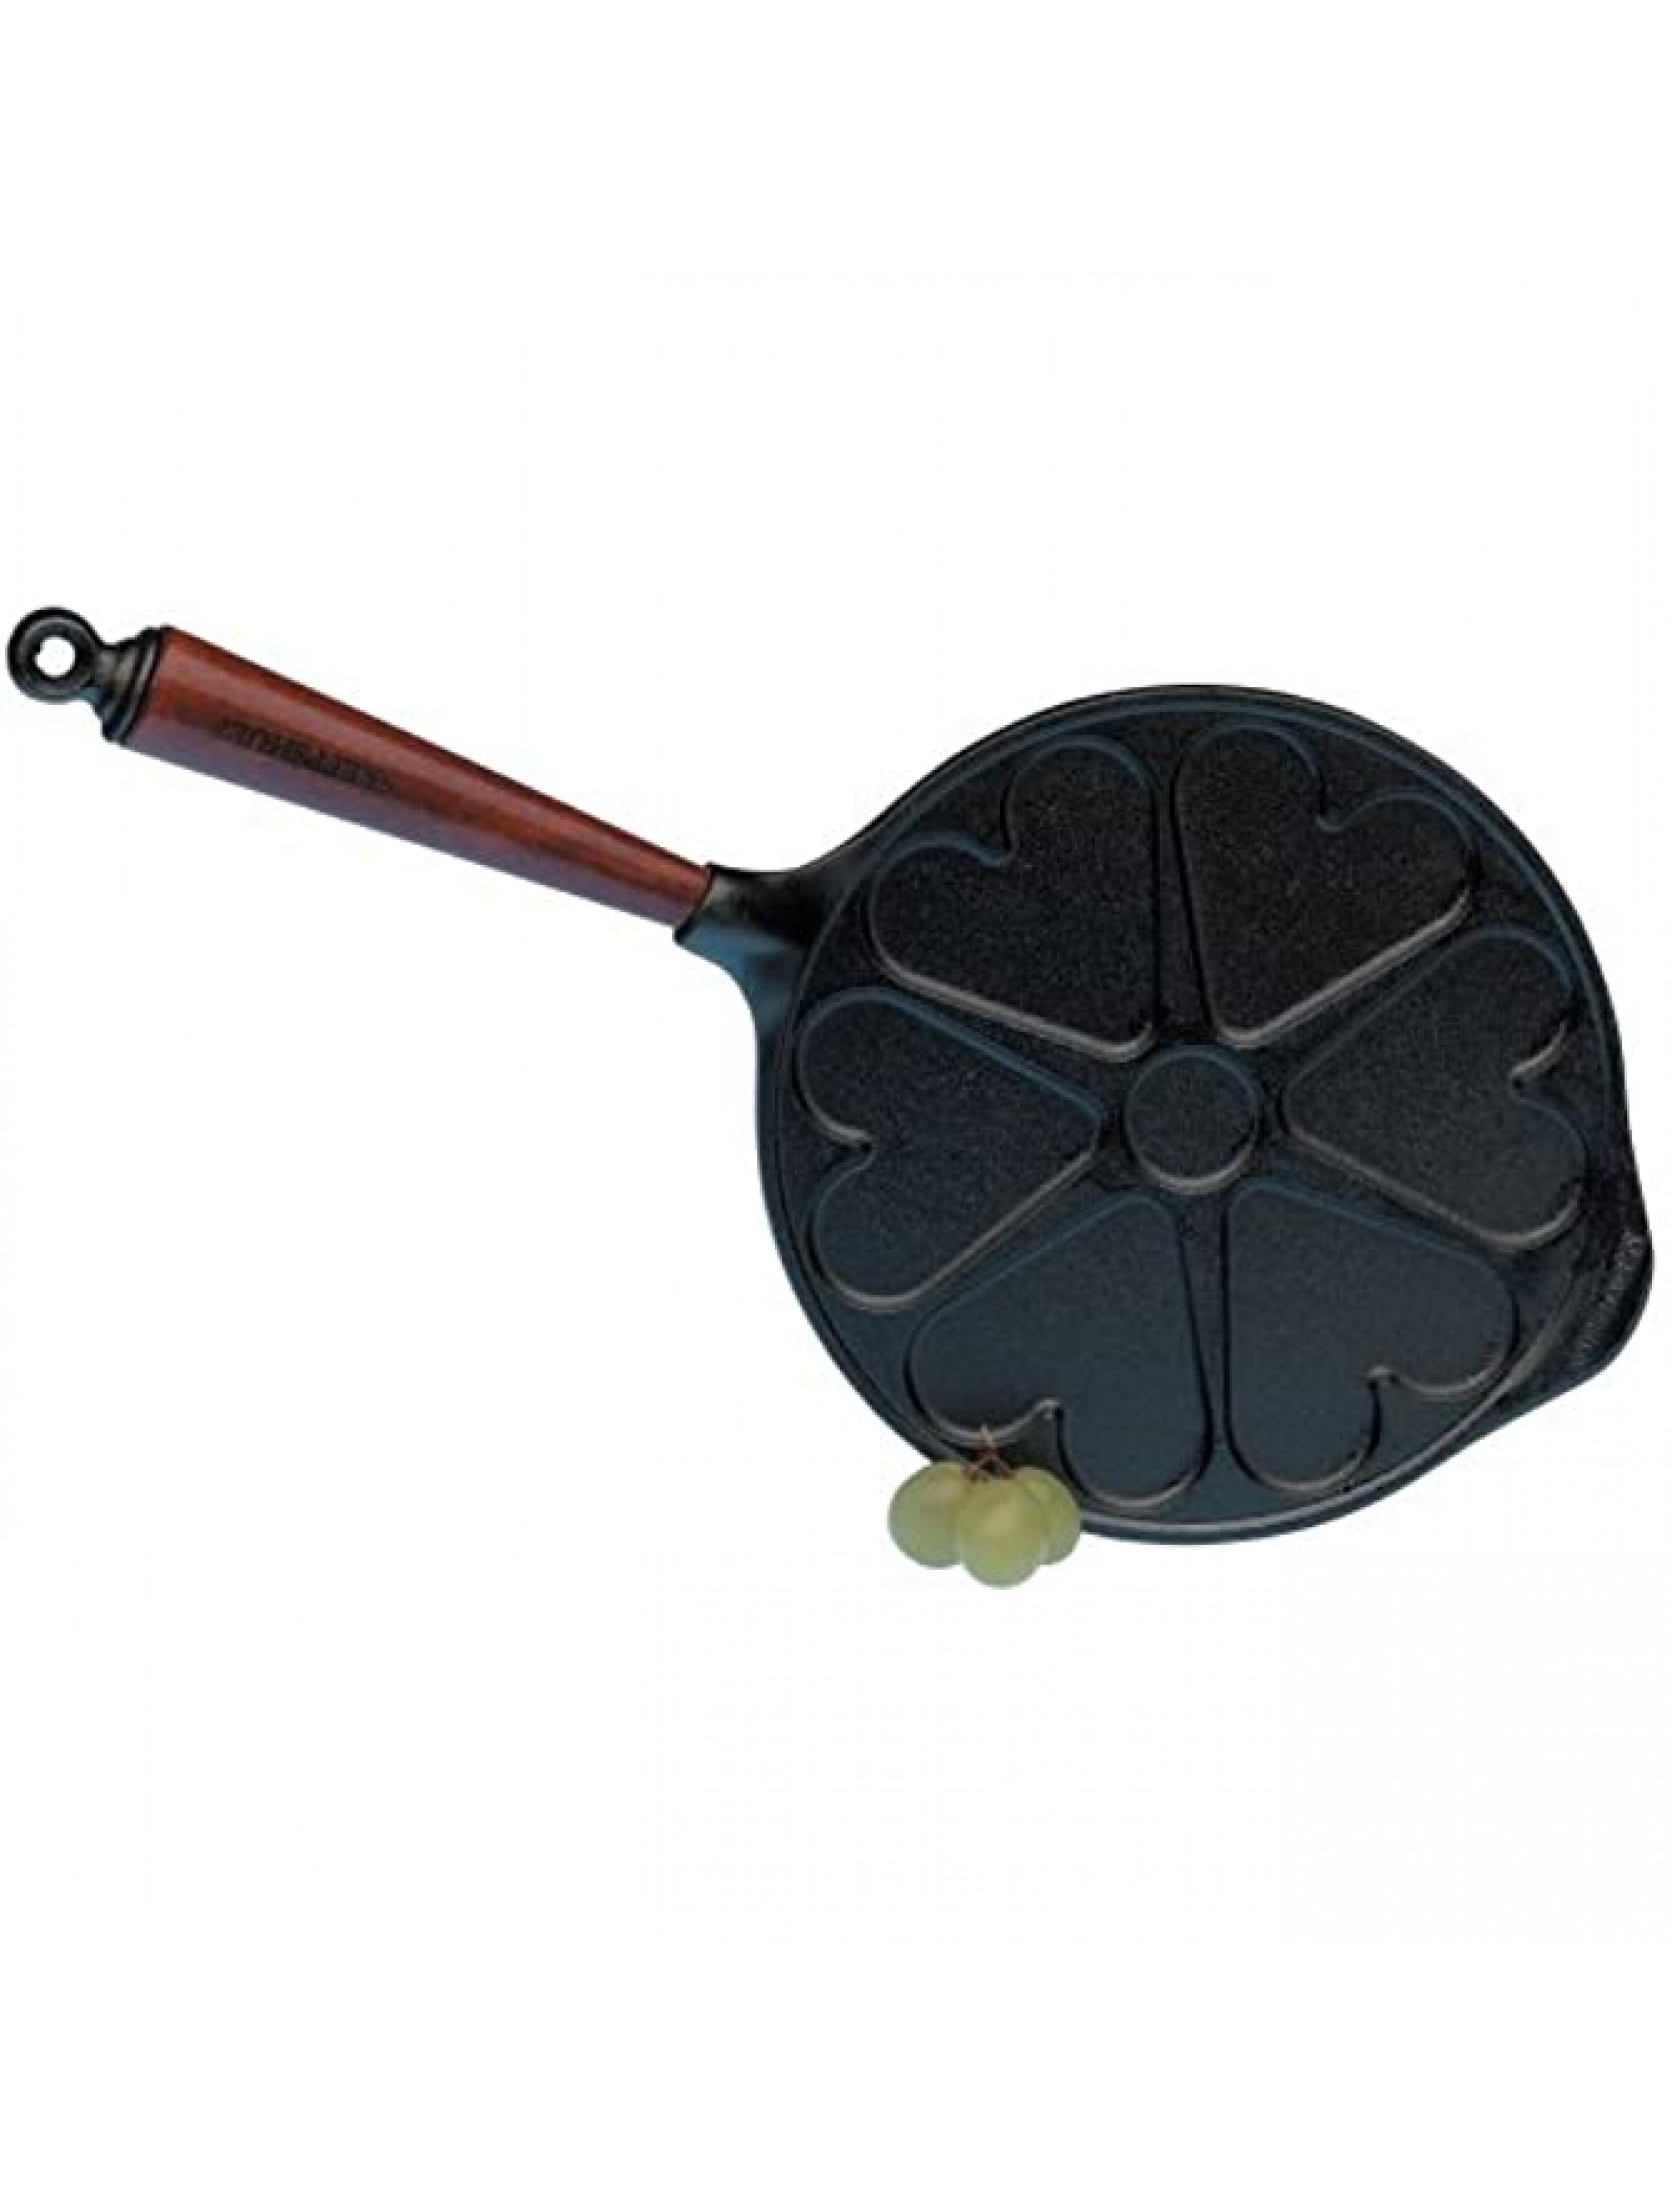 Skeppshult Heart Pancake Iron with Wooden Handle - BRMC1QHF0